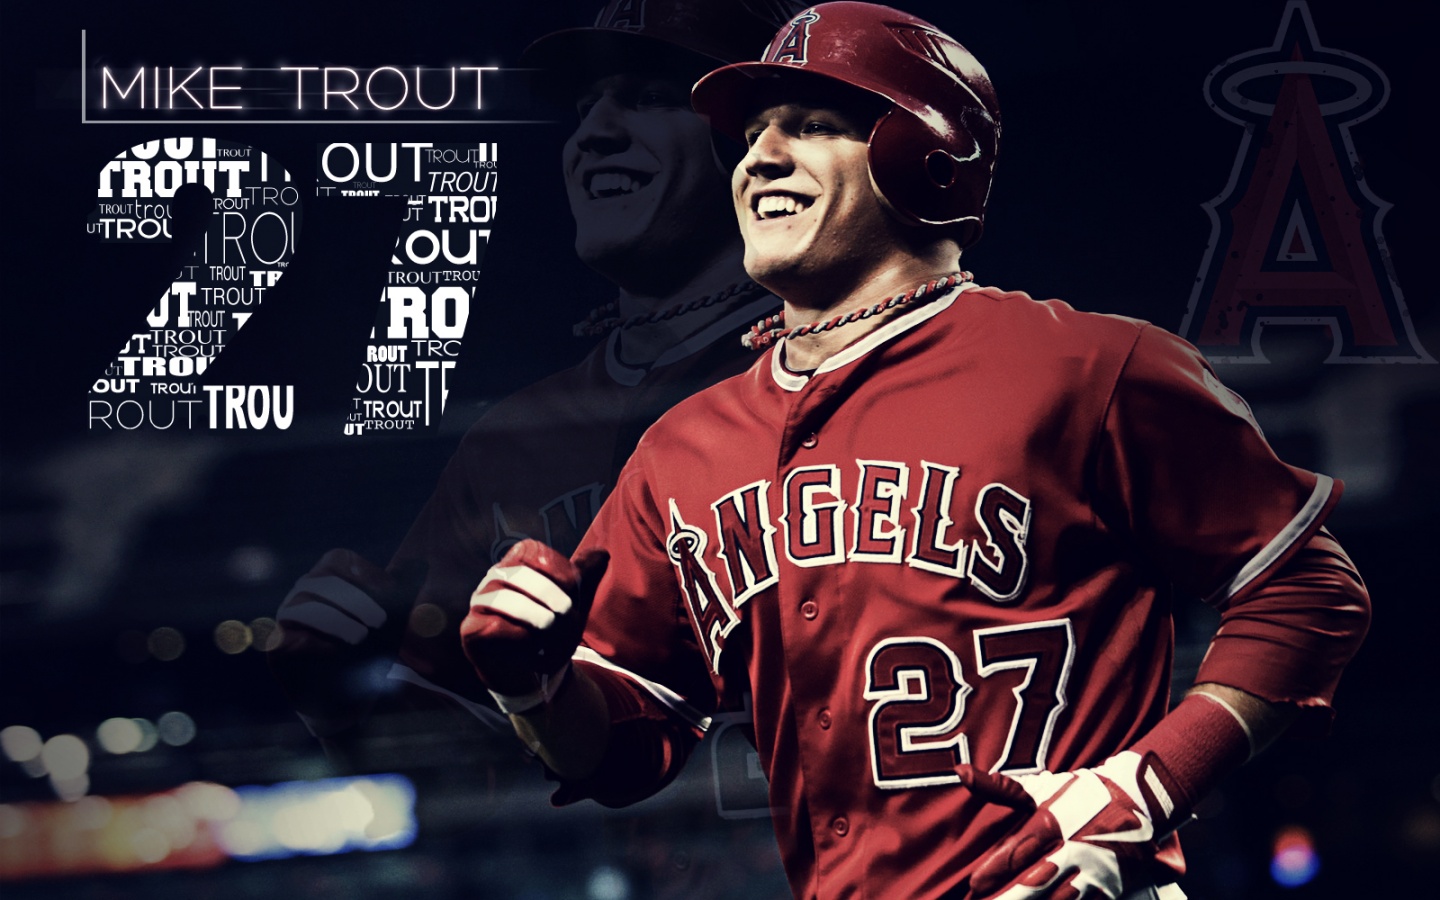 Free Download Download Mike Trout Wallpaper Wallpaper Unknown 1440x900 For Your Desktop Mobile Tablet Explore 46 Cool Mike Trout Wallpapers Cool Mike Trout Wallpapers Mike Trout Wallpaper Mike Trout Wallpapers